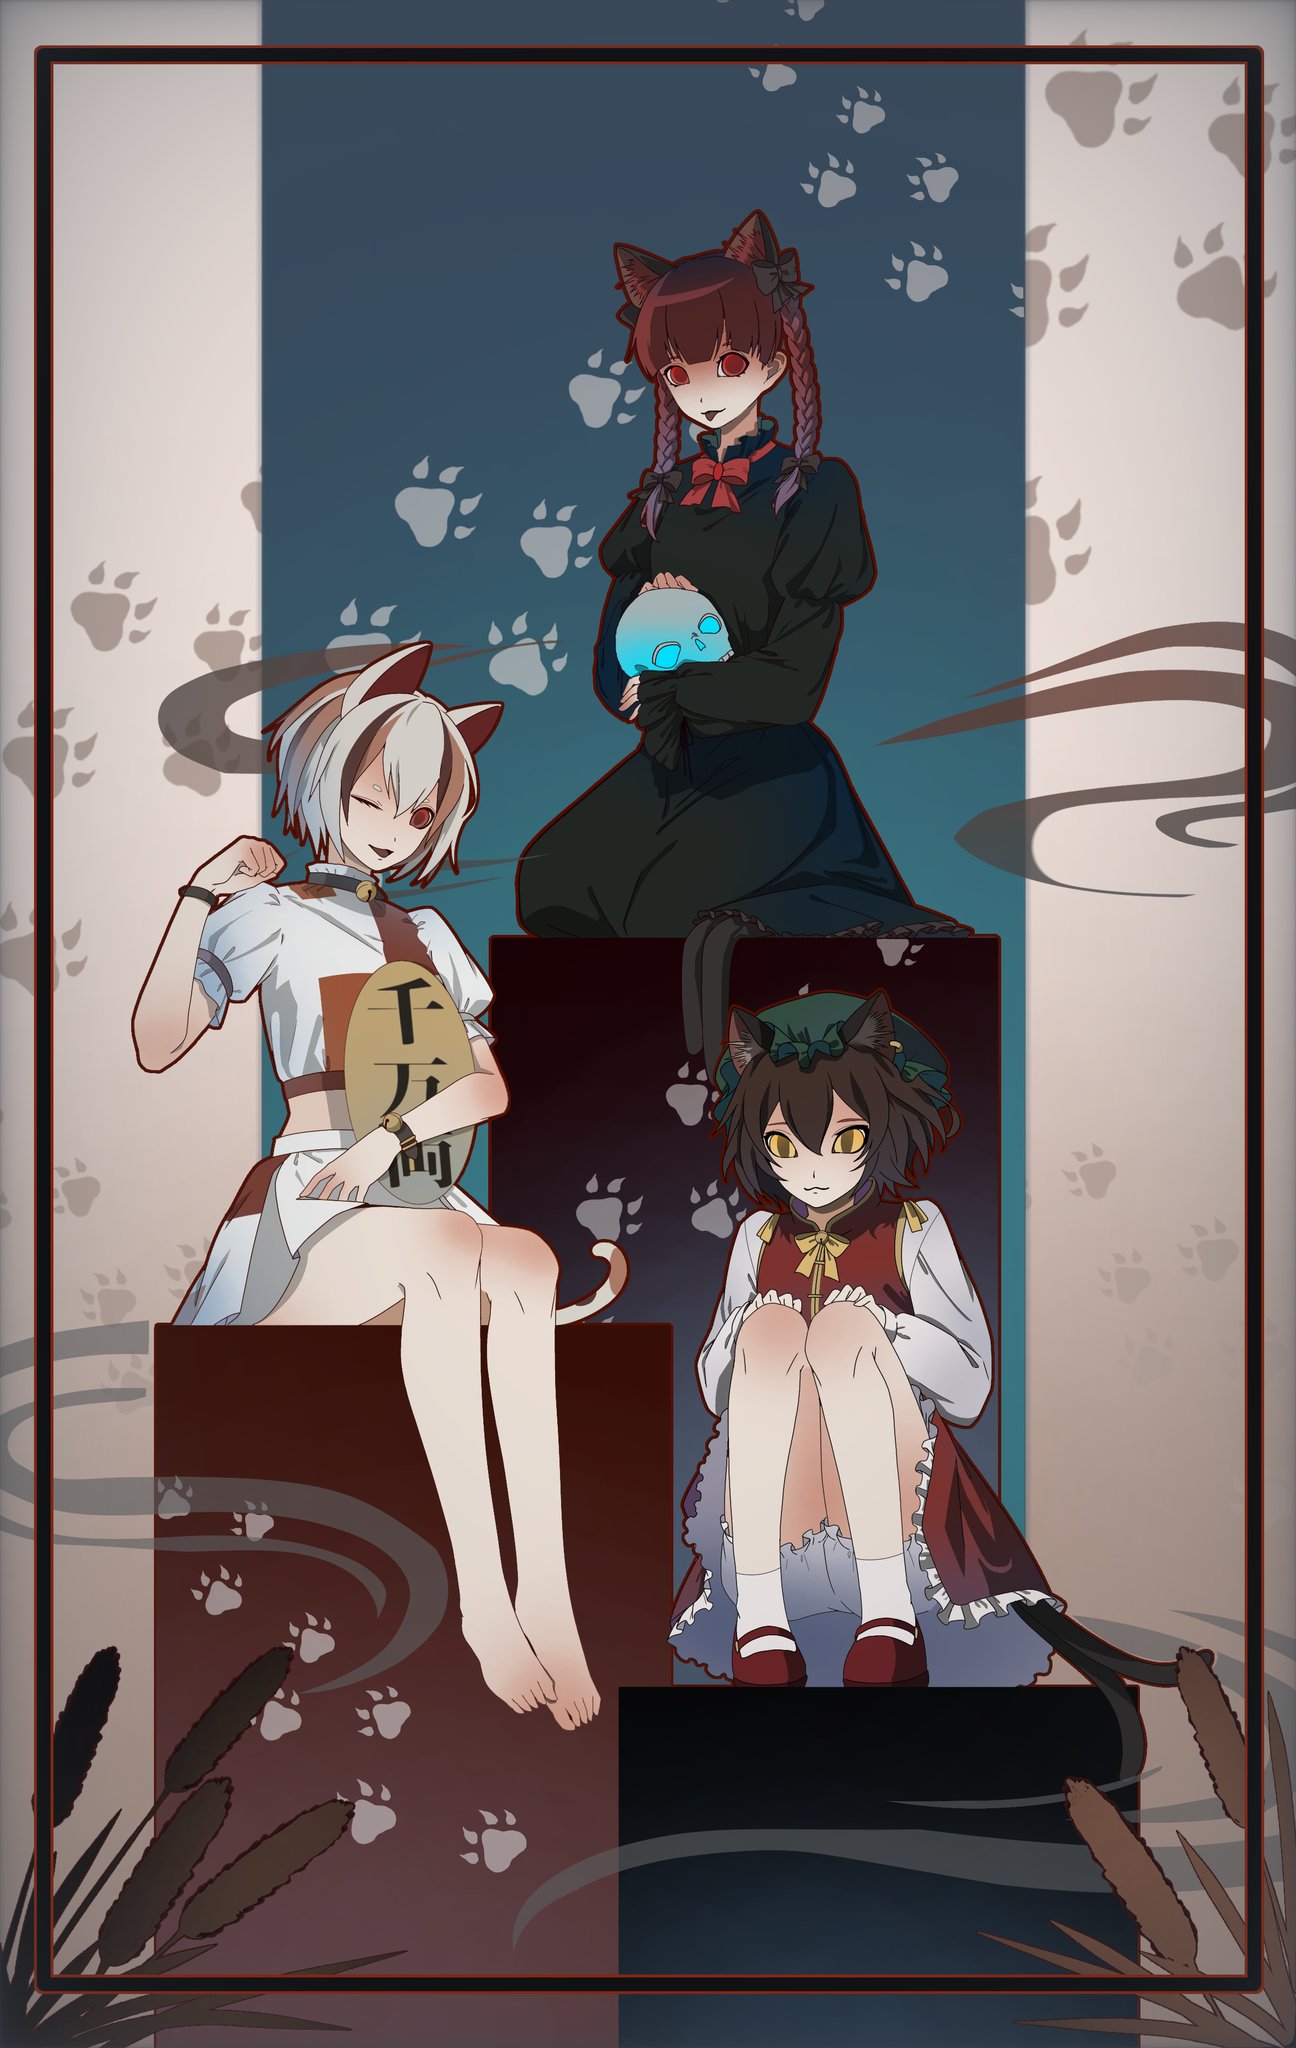 3girls :3 animal_ear_fluff animal_ears barefoot bell black_bow bloomers blue_eyes bow bowtie braid brown_hair calico cat_ears cat_tail chen coin dress earrings framed glowing gold_coin goutokuji_mike green_dress green_headwear highres holding holding_skull jewelry kaenbyou_rin mary_janes multicolored_hair multiple_girls multiple_tails neck_bell nekomata one_eye_closed open_mouth patch patchwork_clothes paw_print puffy_short_sleeves puffy_sleeves red_bow red_bowtie red_dress red_eyes red_footwear redhead reeds shoes short_hair short_sleeves single_earring skull slit_pupils smile tail tongue tongue_out touhou twin_braids two_tails underwear white_hair yakumokou_8 yellow_bow yellow_bowtie yellow_eyes